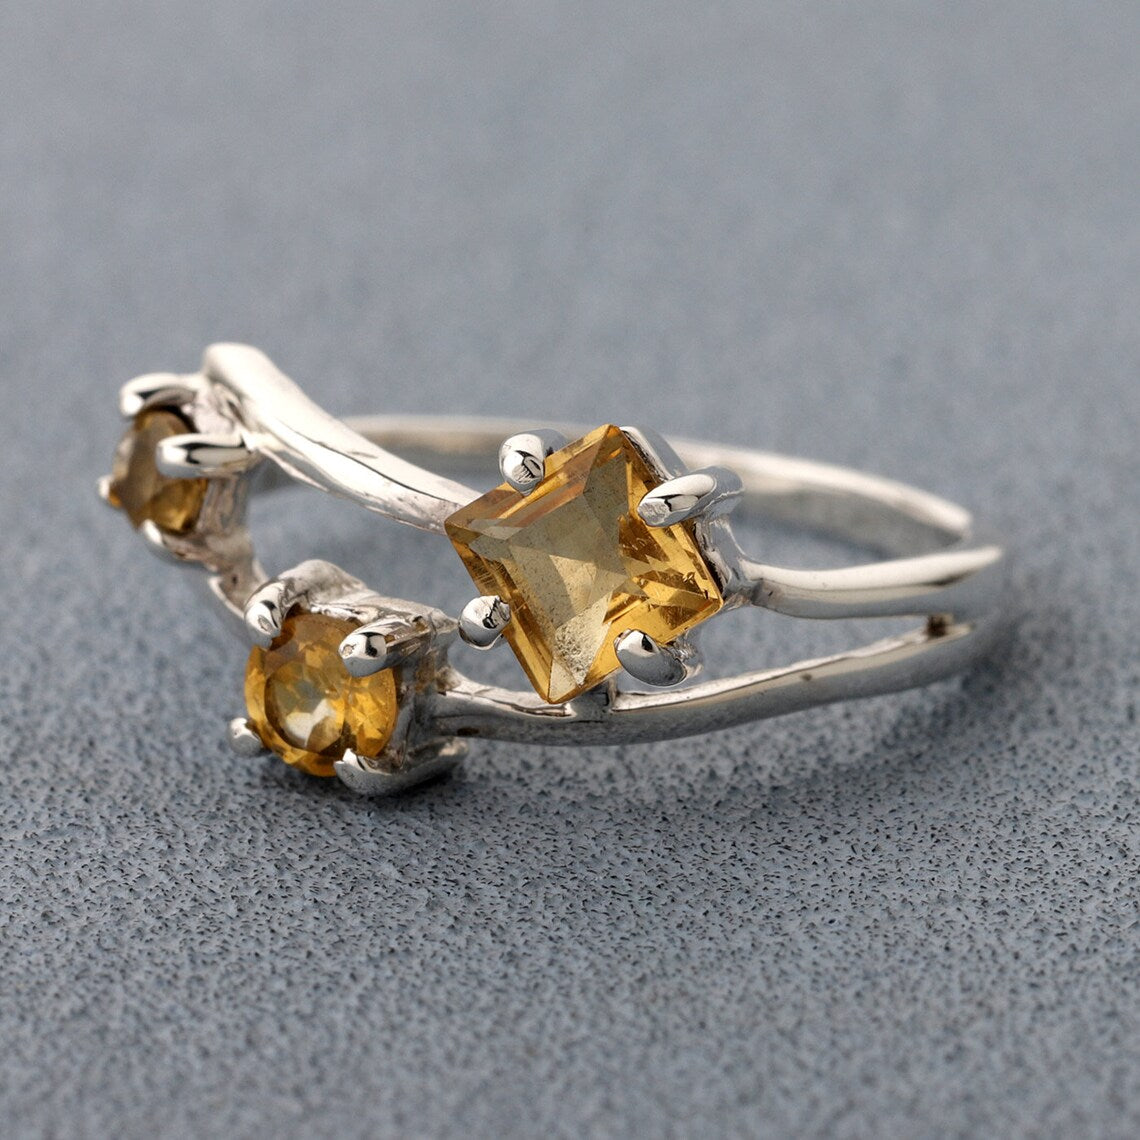 Citirne Ring, Yellow Citrine Ring, Citrine Prong Ring, Multi Citrine Ring, Gift For Her, Everyday Ring, Gift, Round Citrine Silver Ring